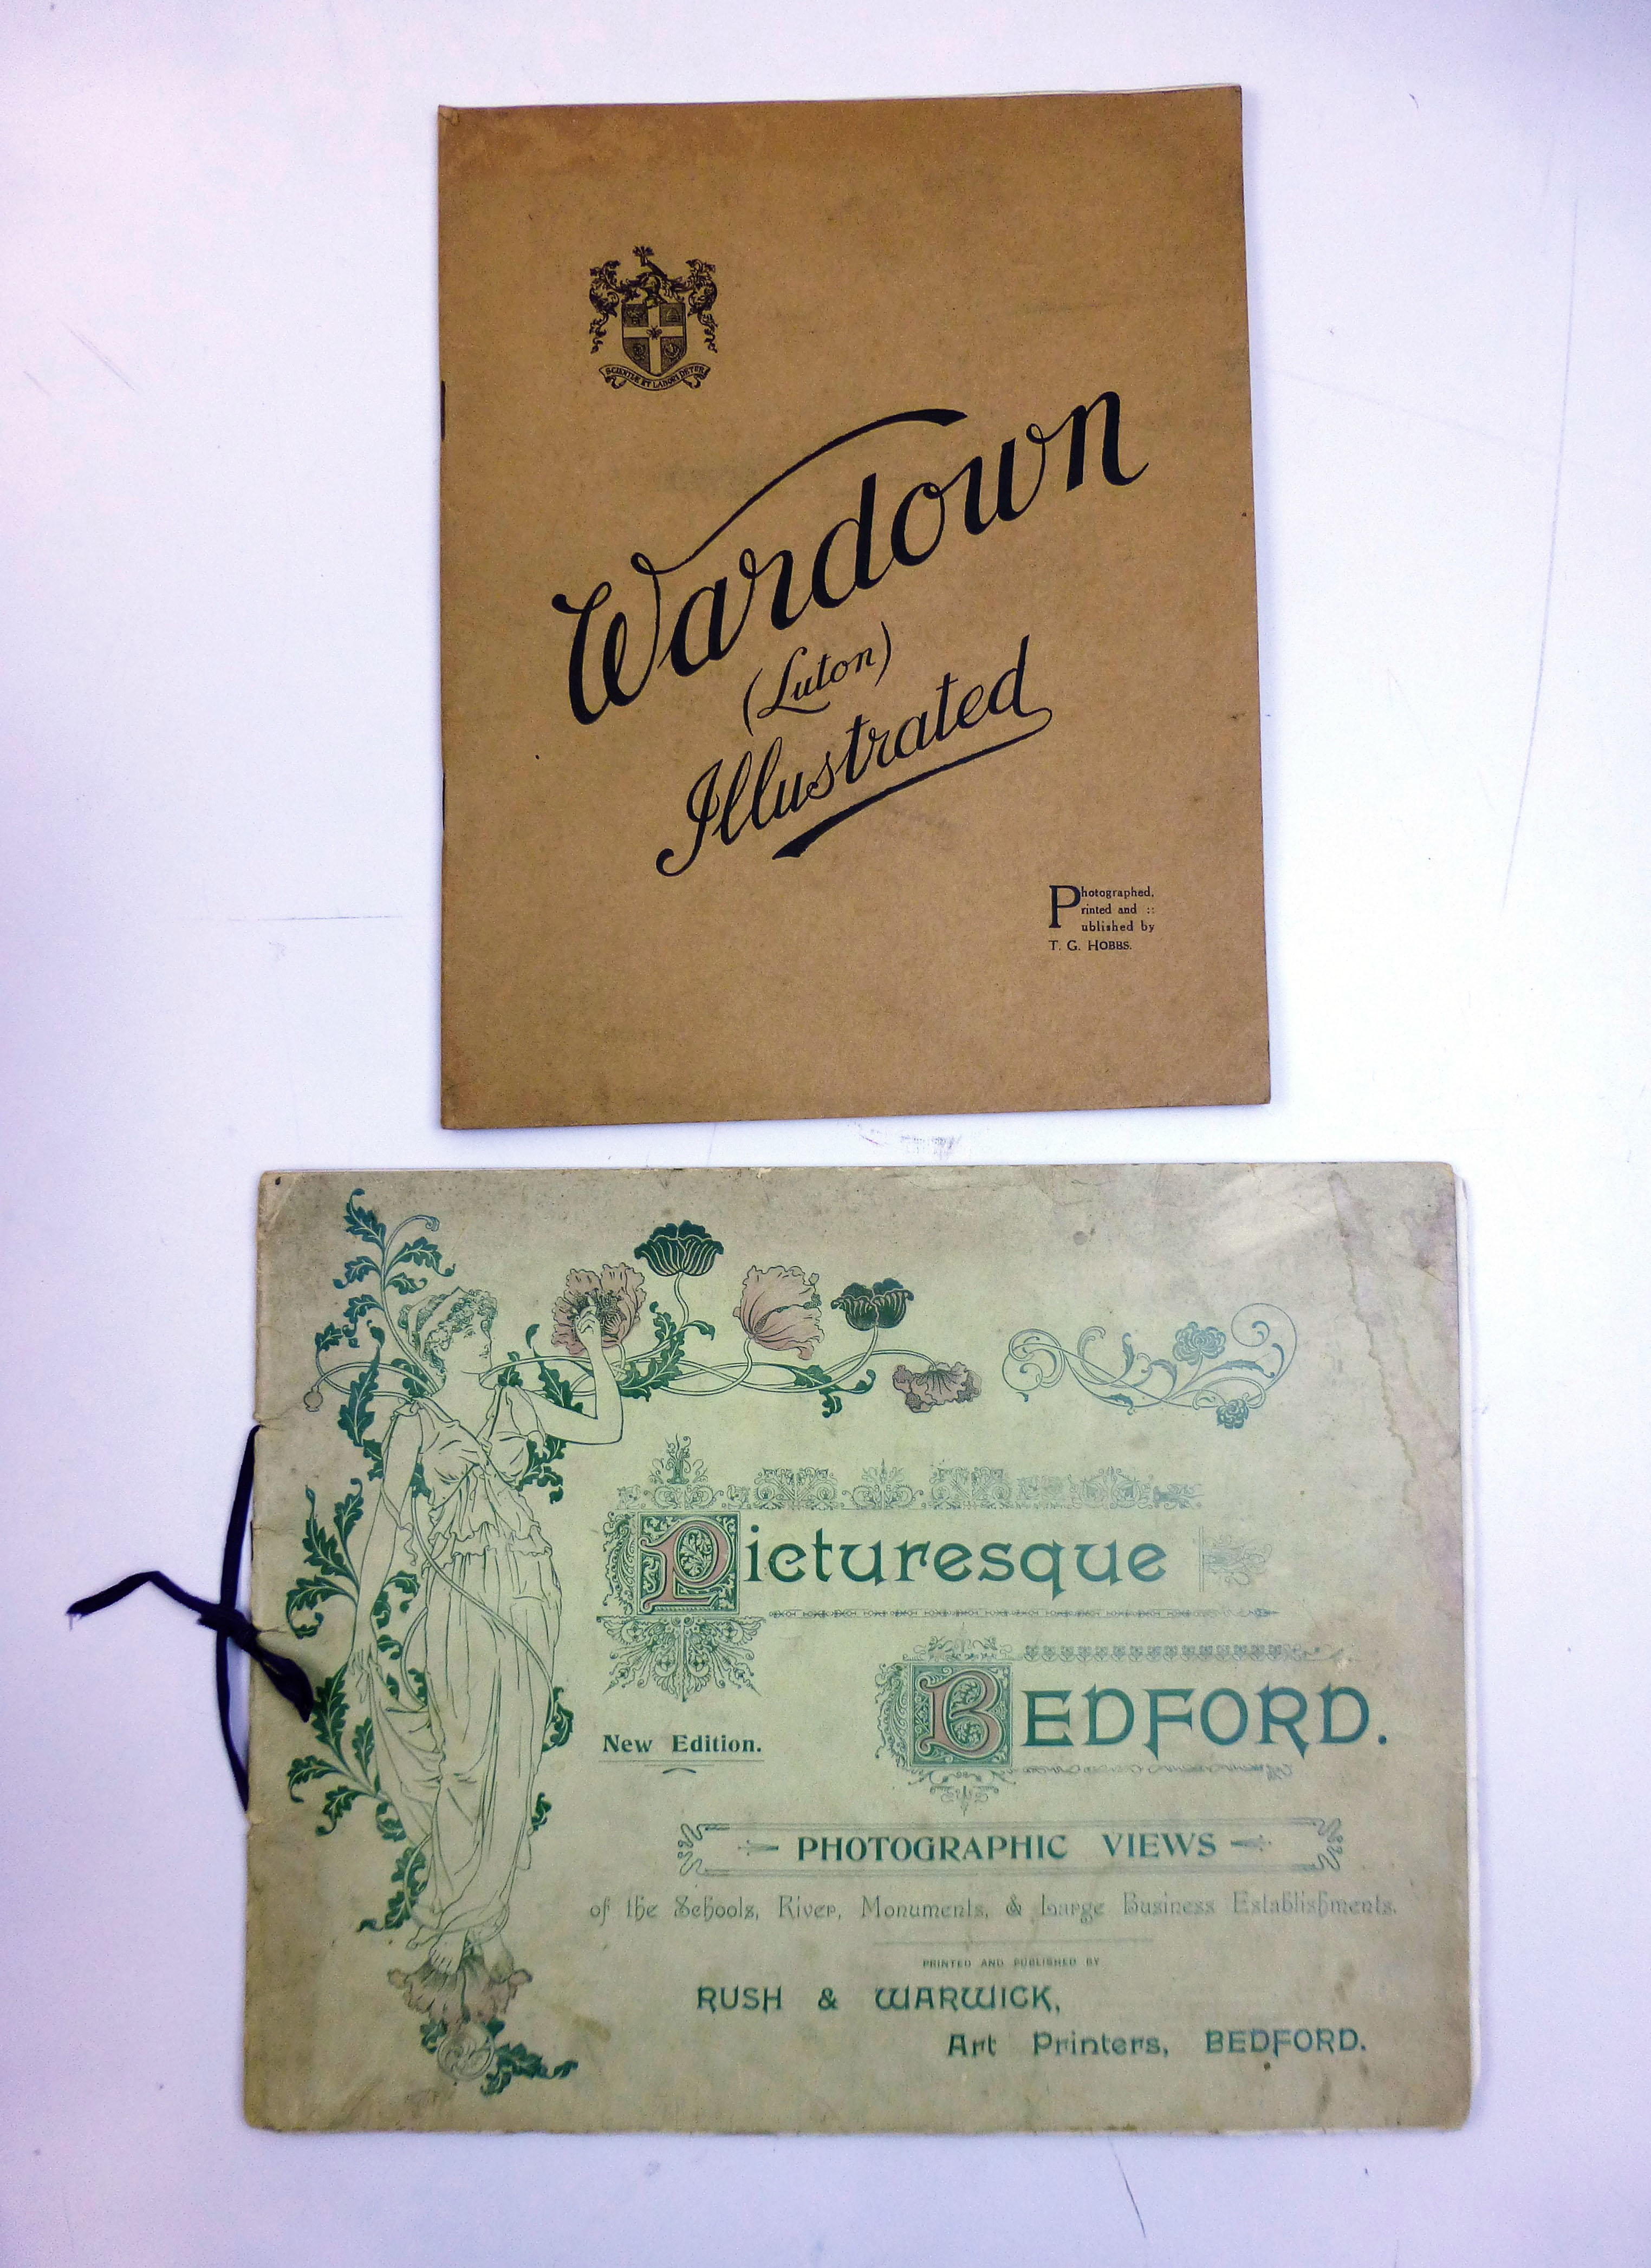 Picturesque Bedford - Photographic Views of the Schools, River,